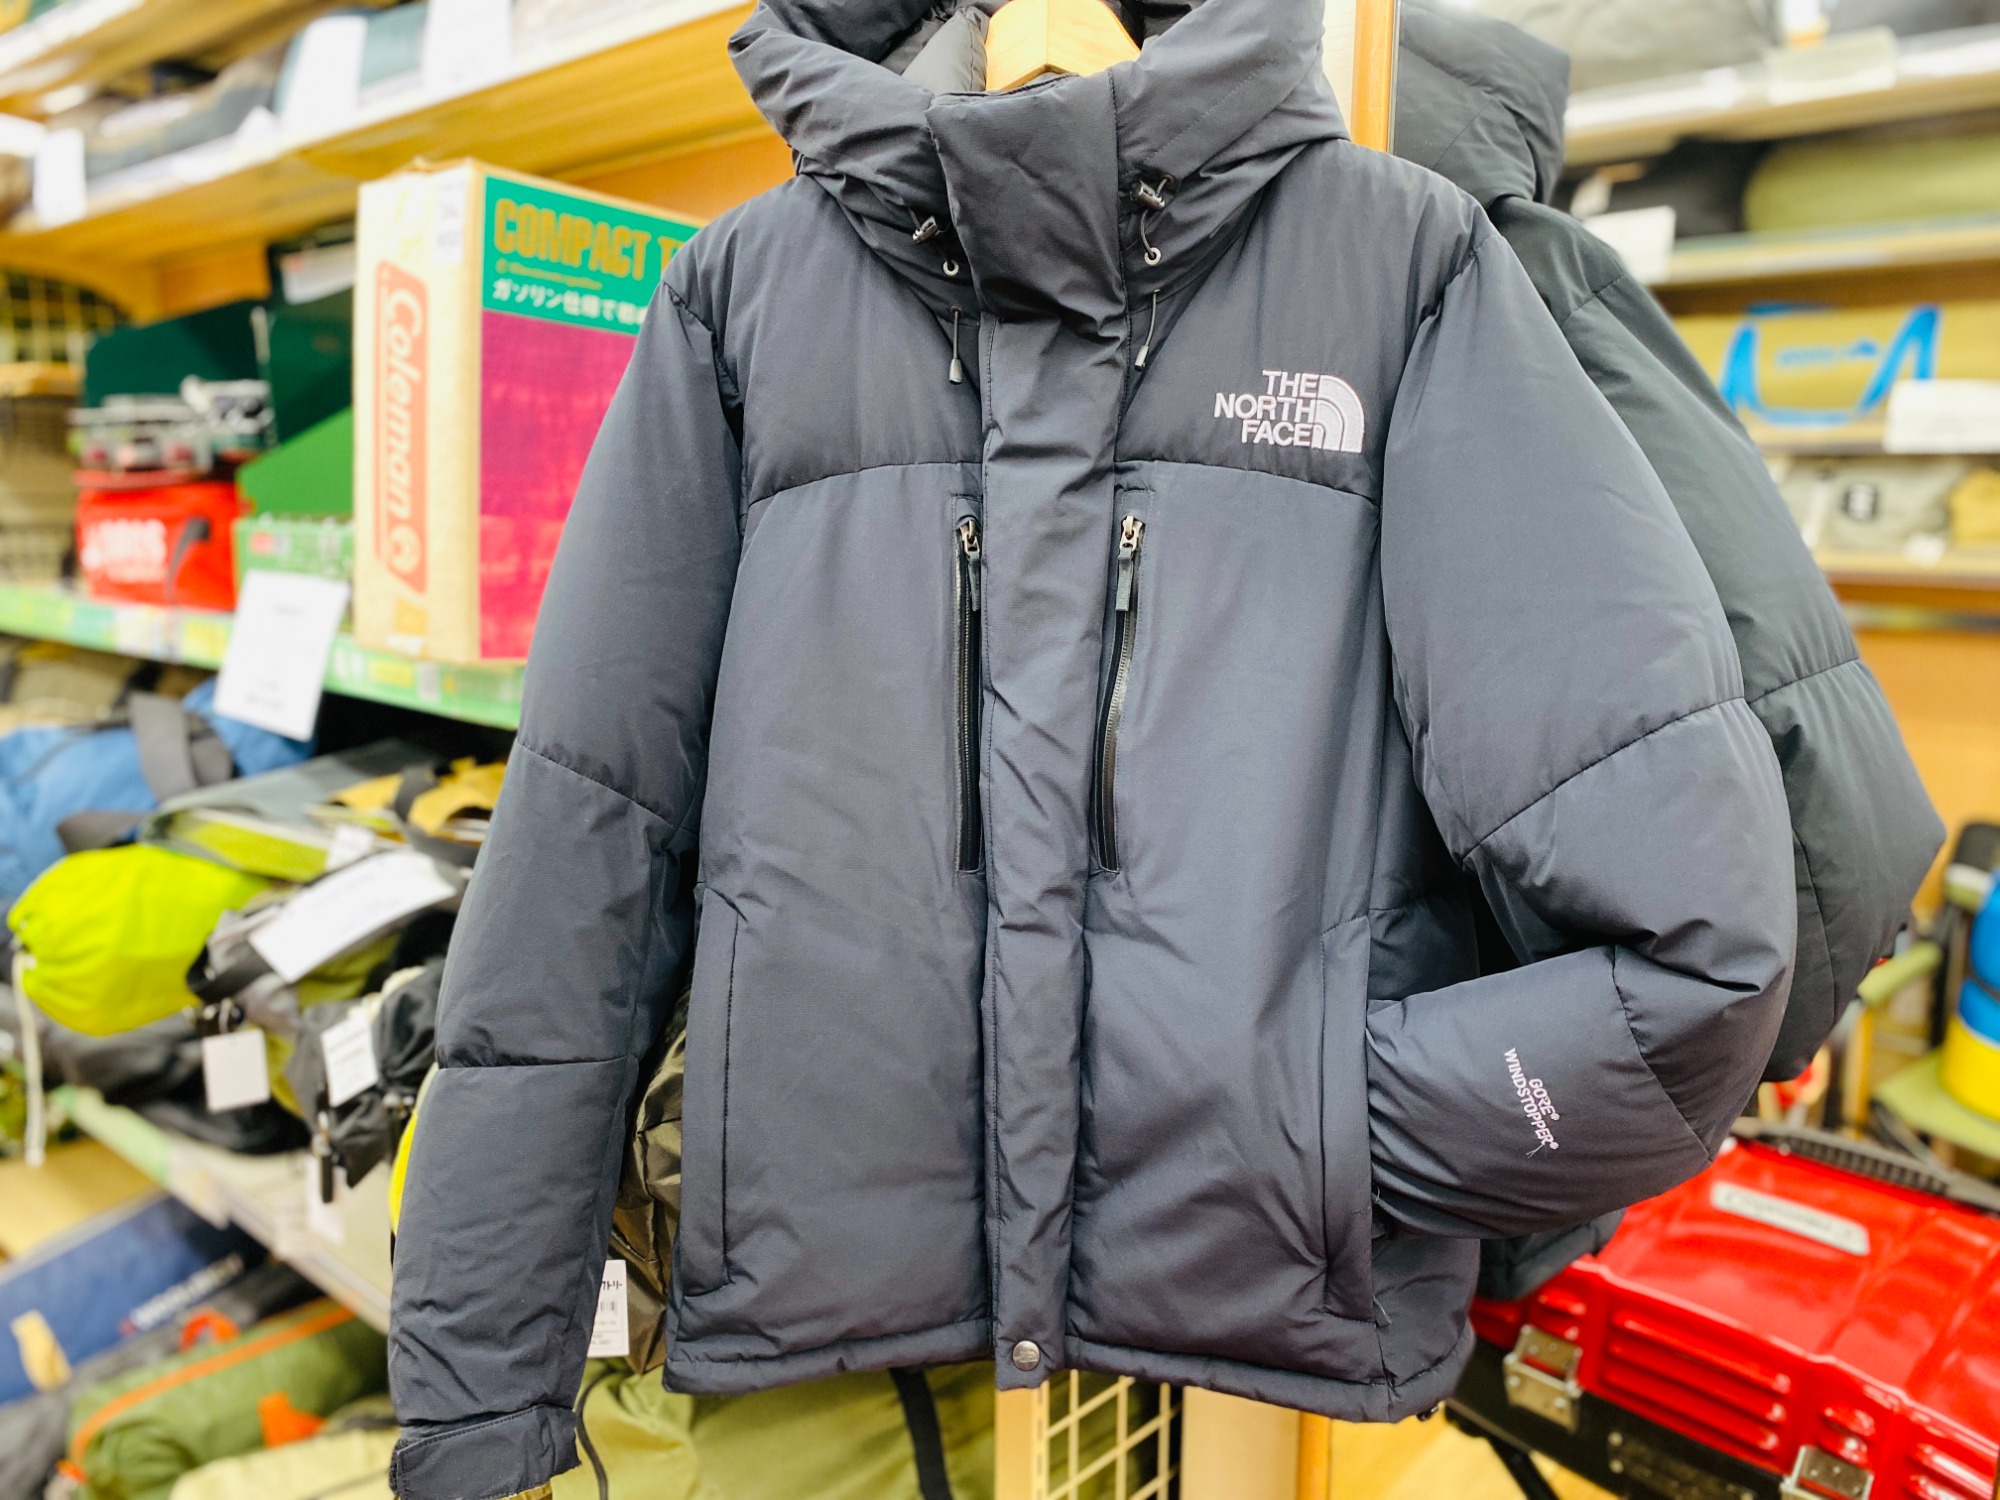 THE NORTH FACE (ノースフェース) バルトロライトジャケット ND91641